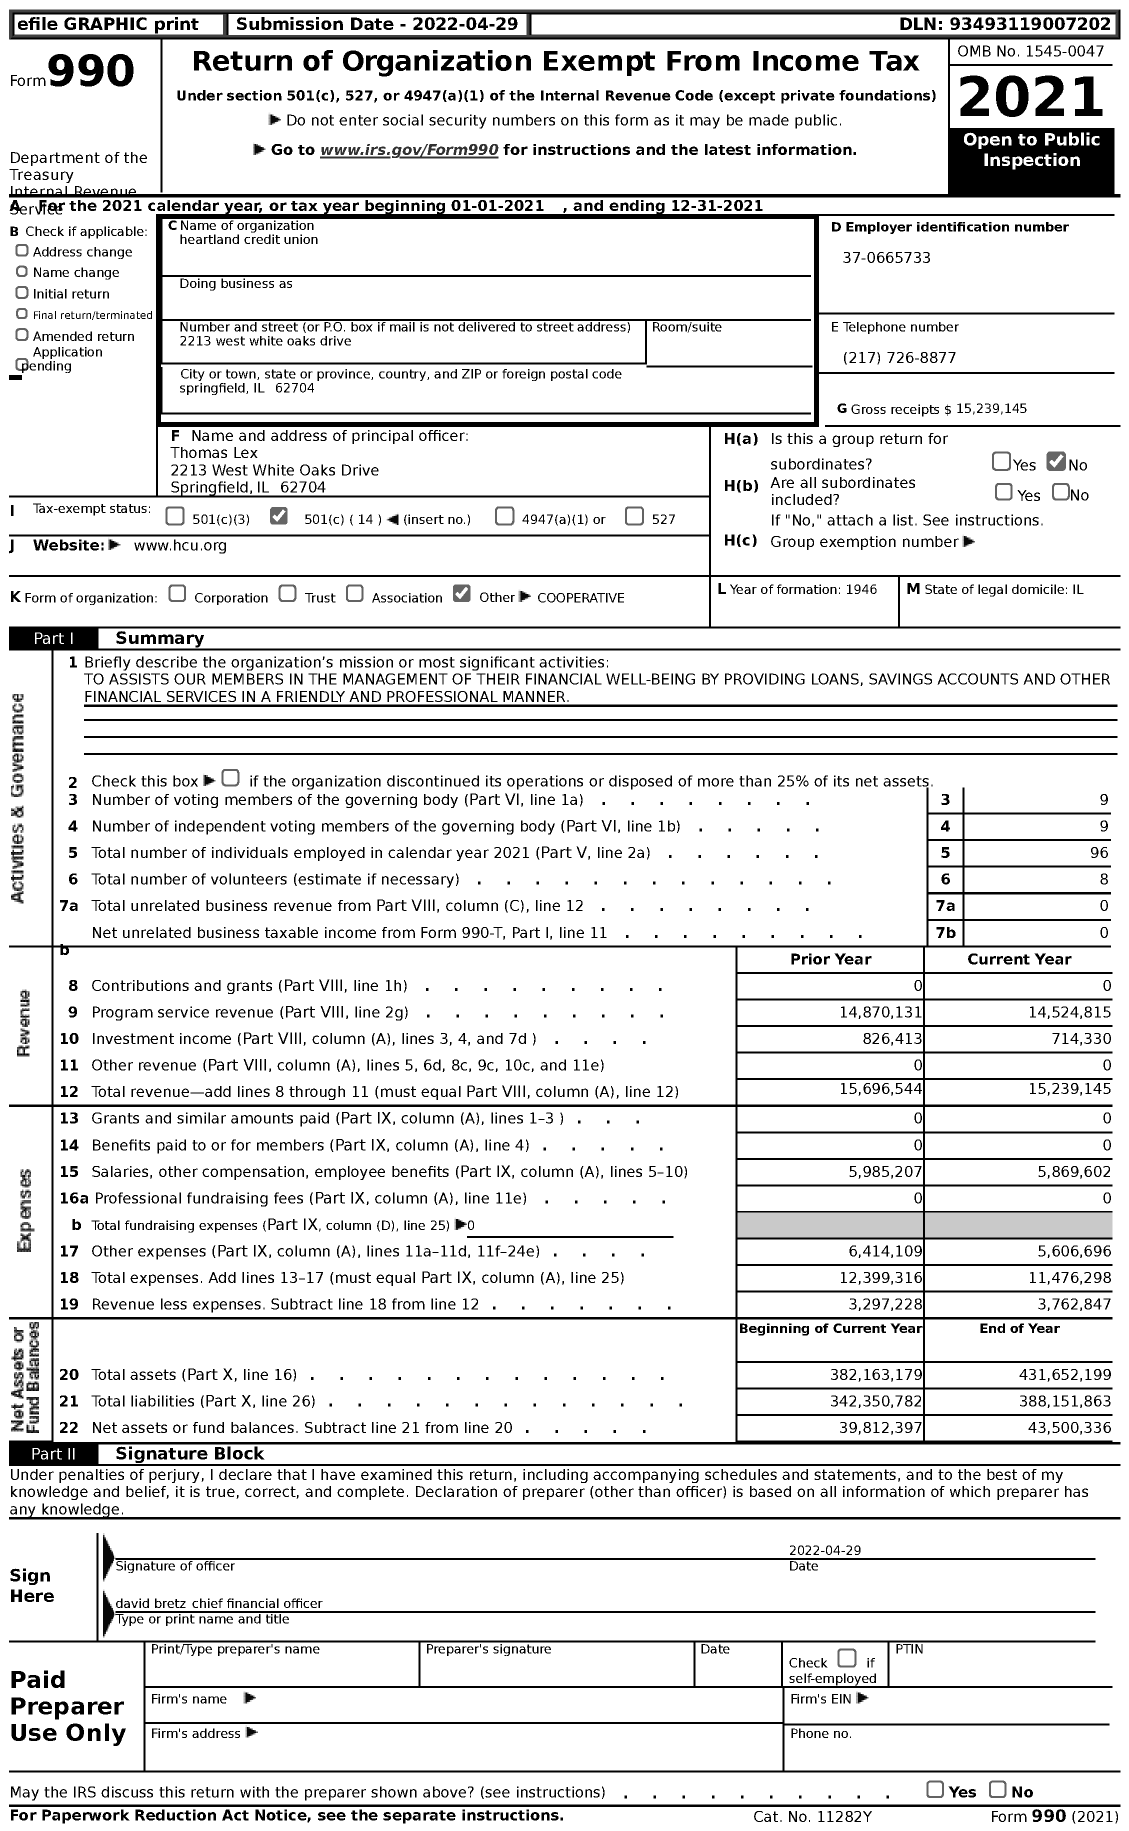 Image of first page of 2021 Form 990 for heartland credit union